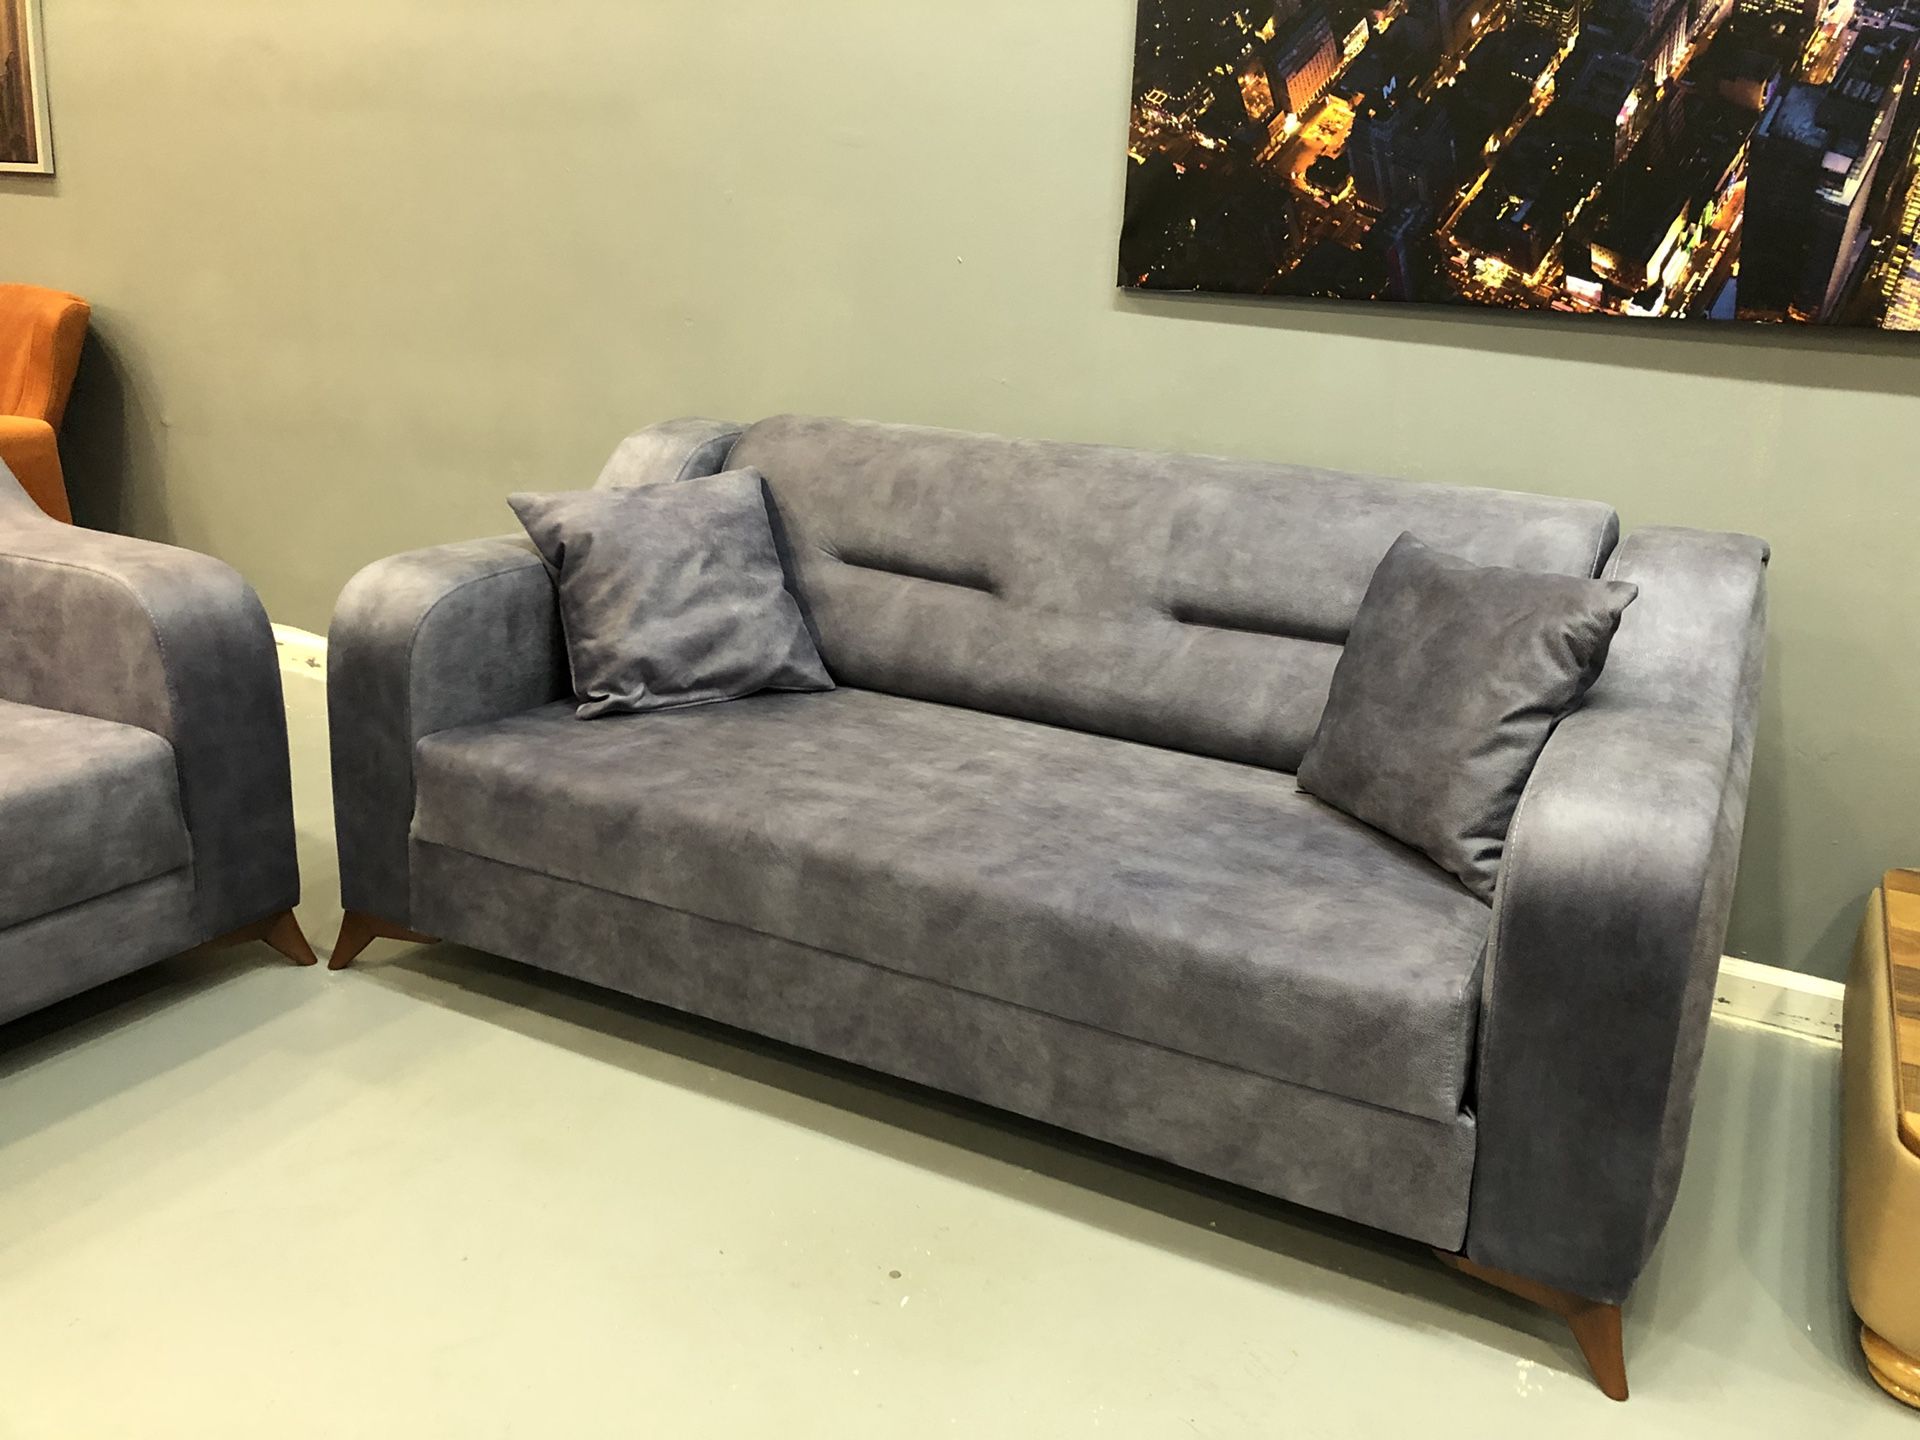 Sofa Bed - queen size - (Easy to open and close )